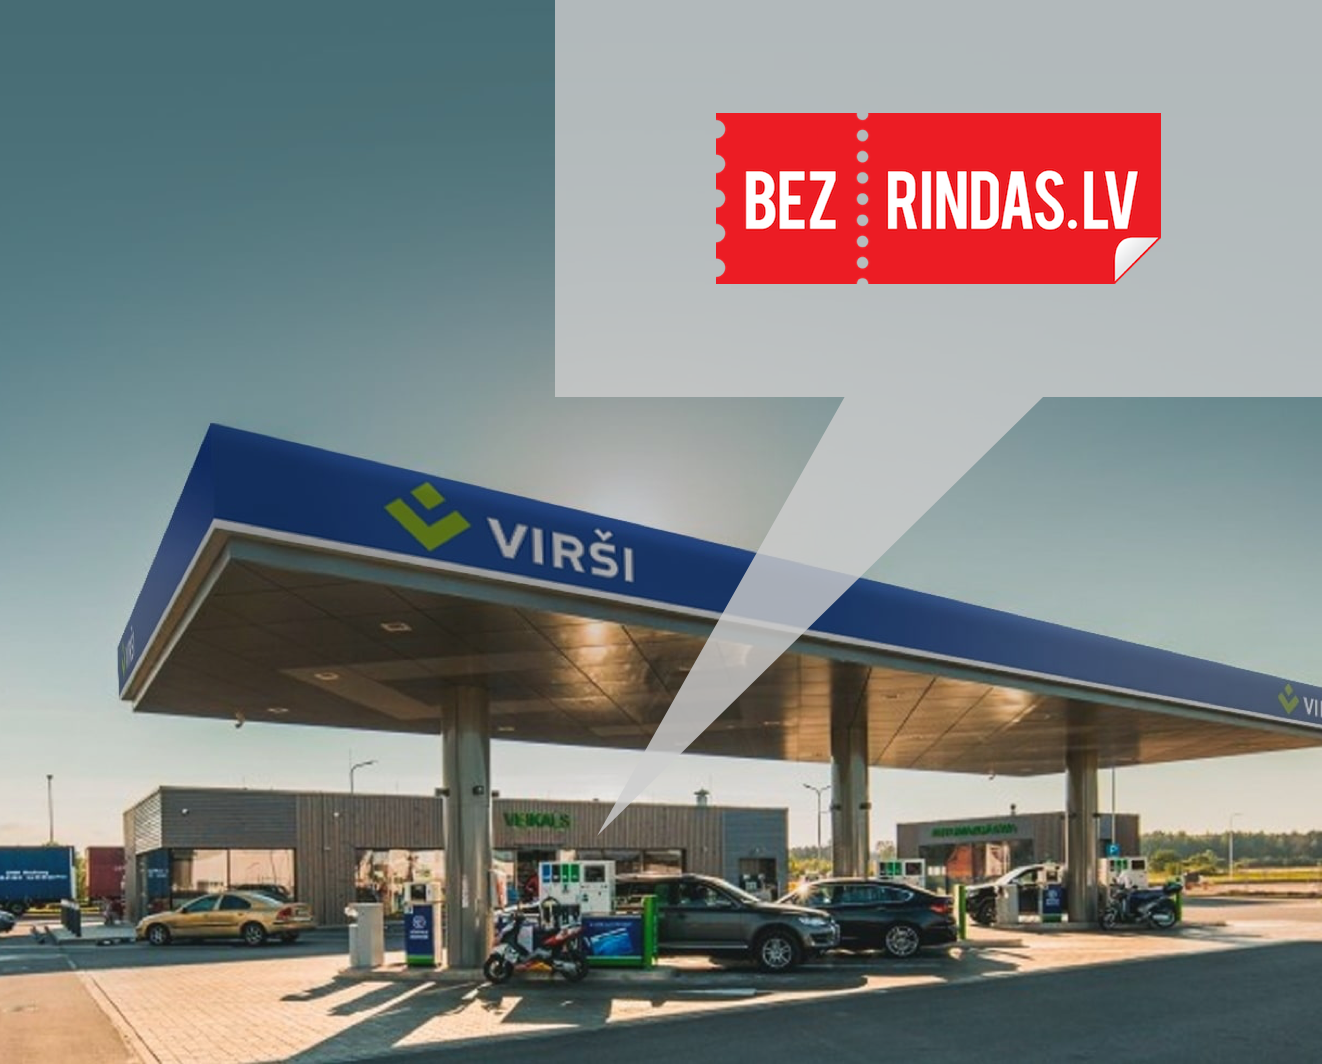 Bezrindas.lv tickets - now also available at Virsi gas stations!